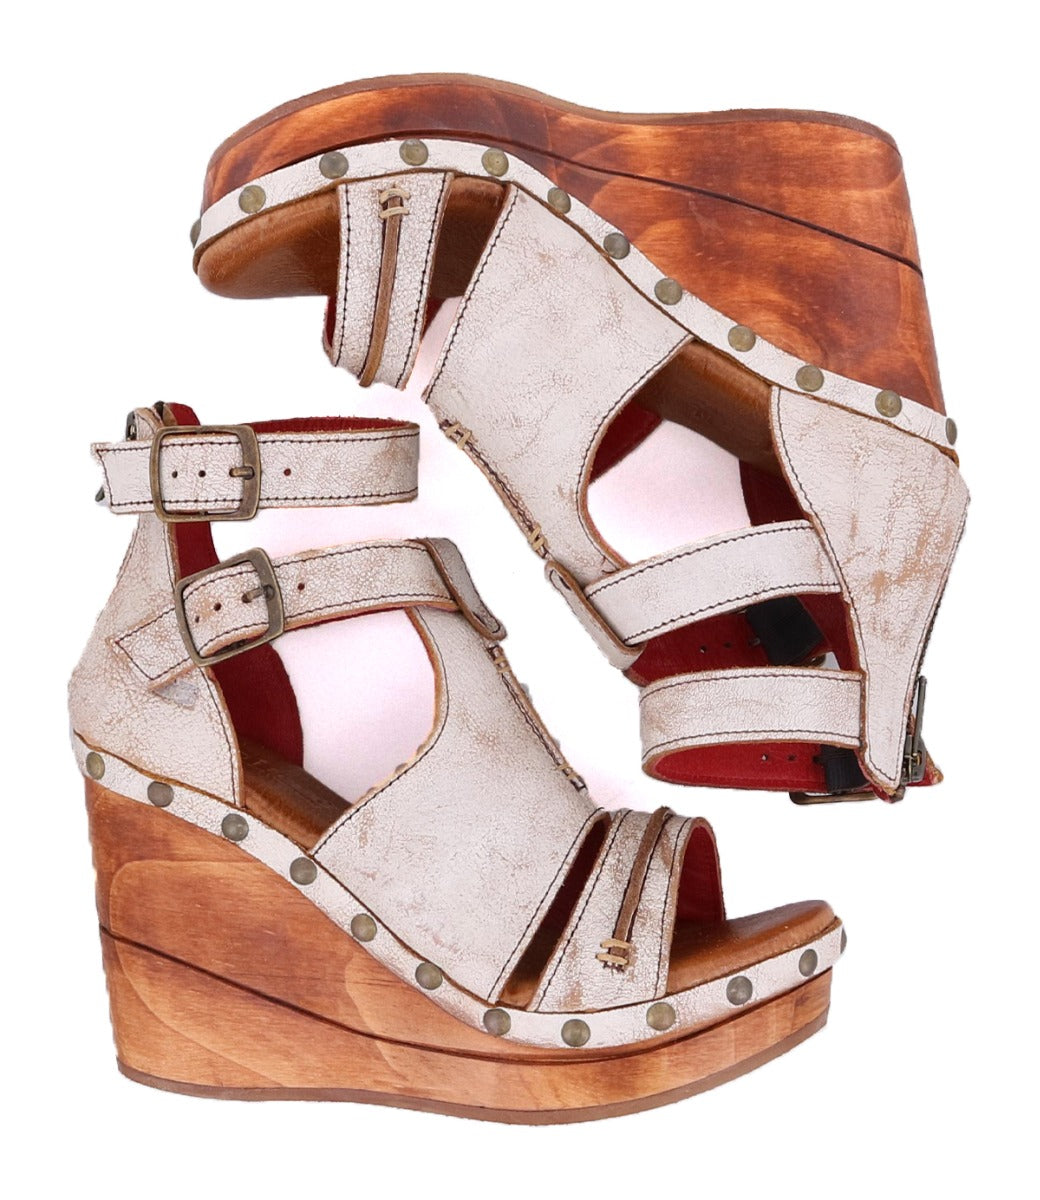 A pair of Princess wedge sandals from Bed Stu with straps.